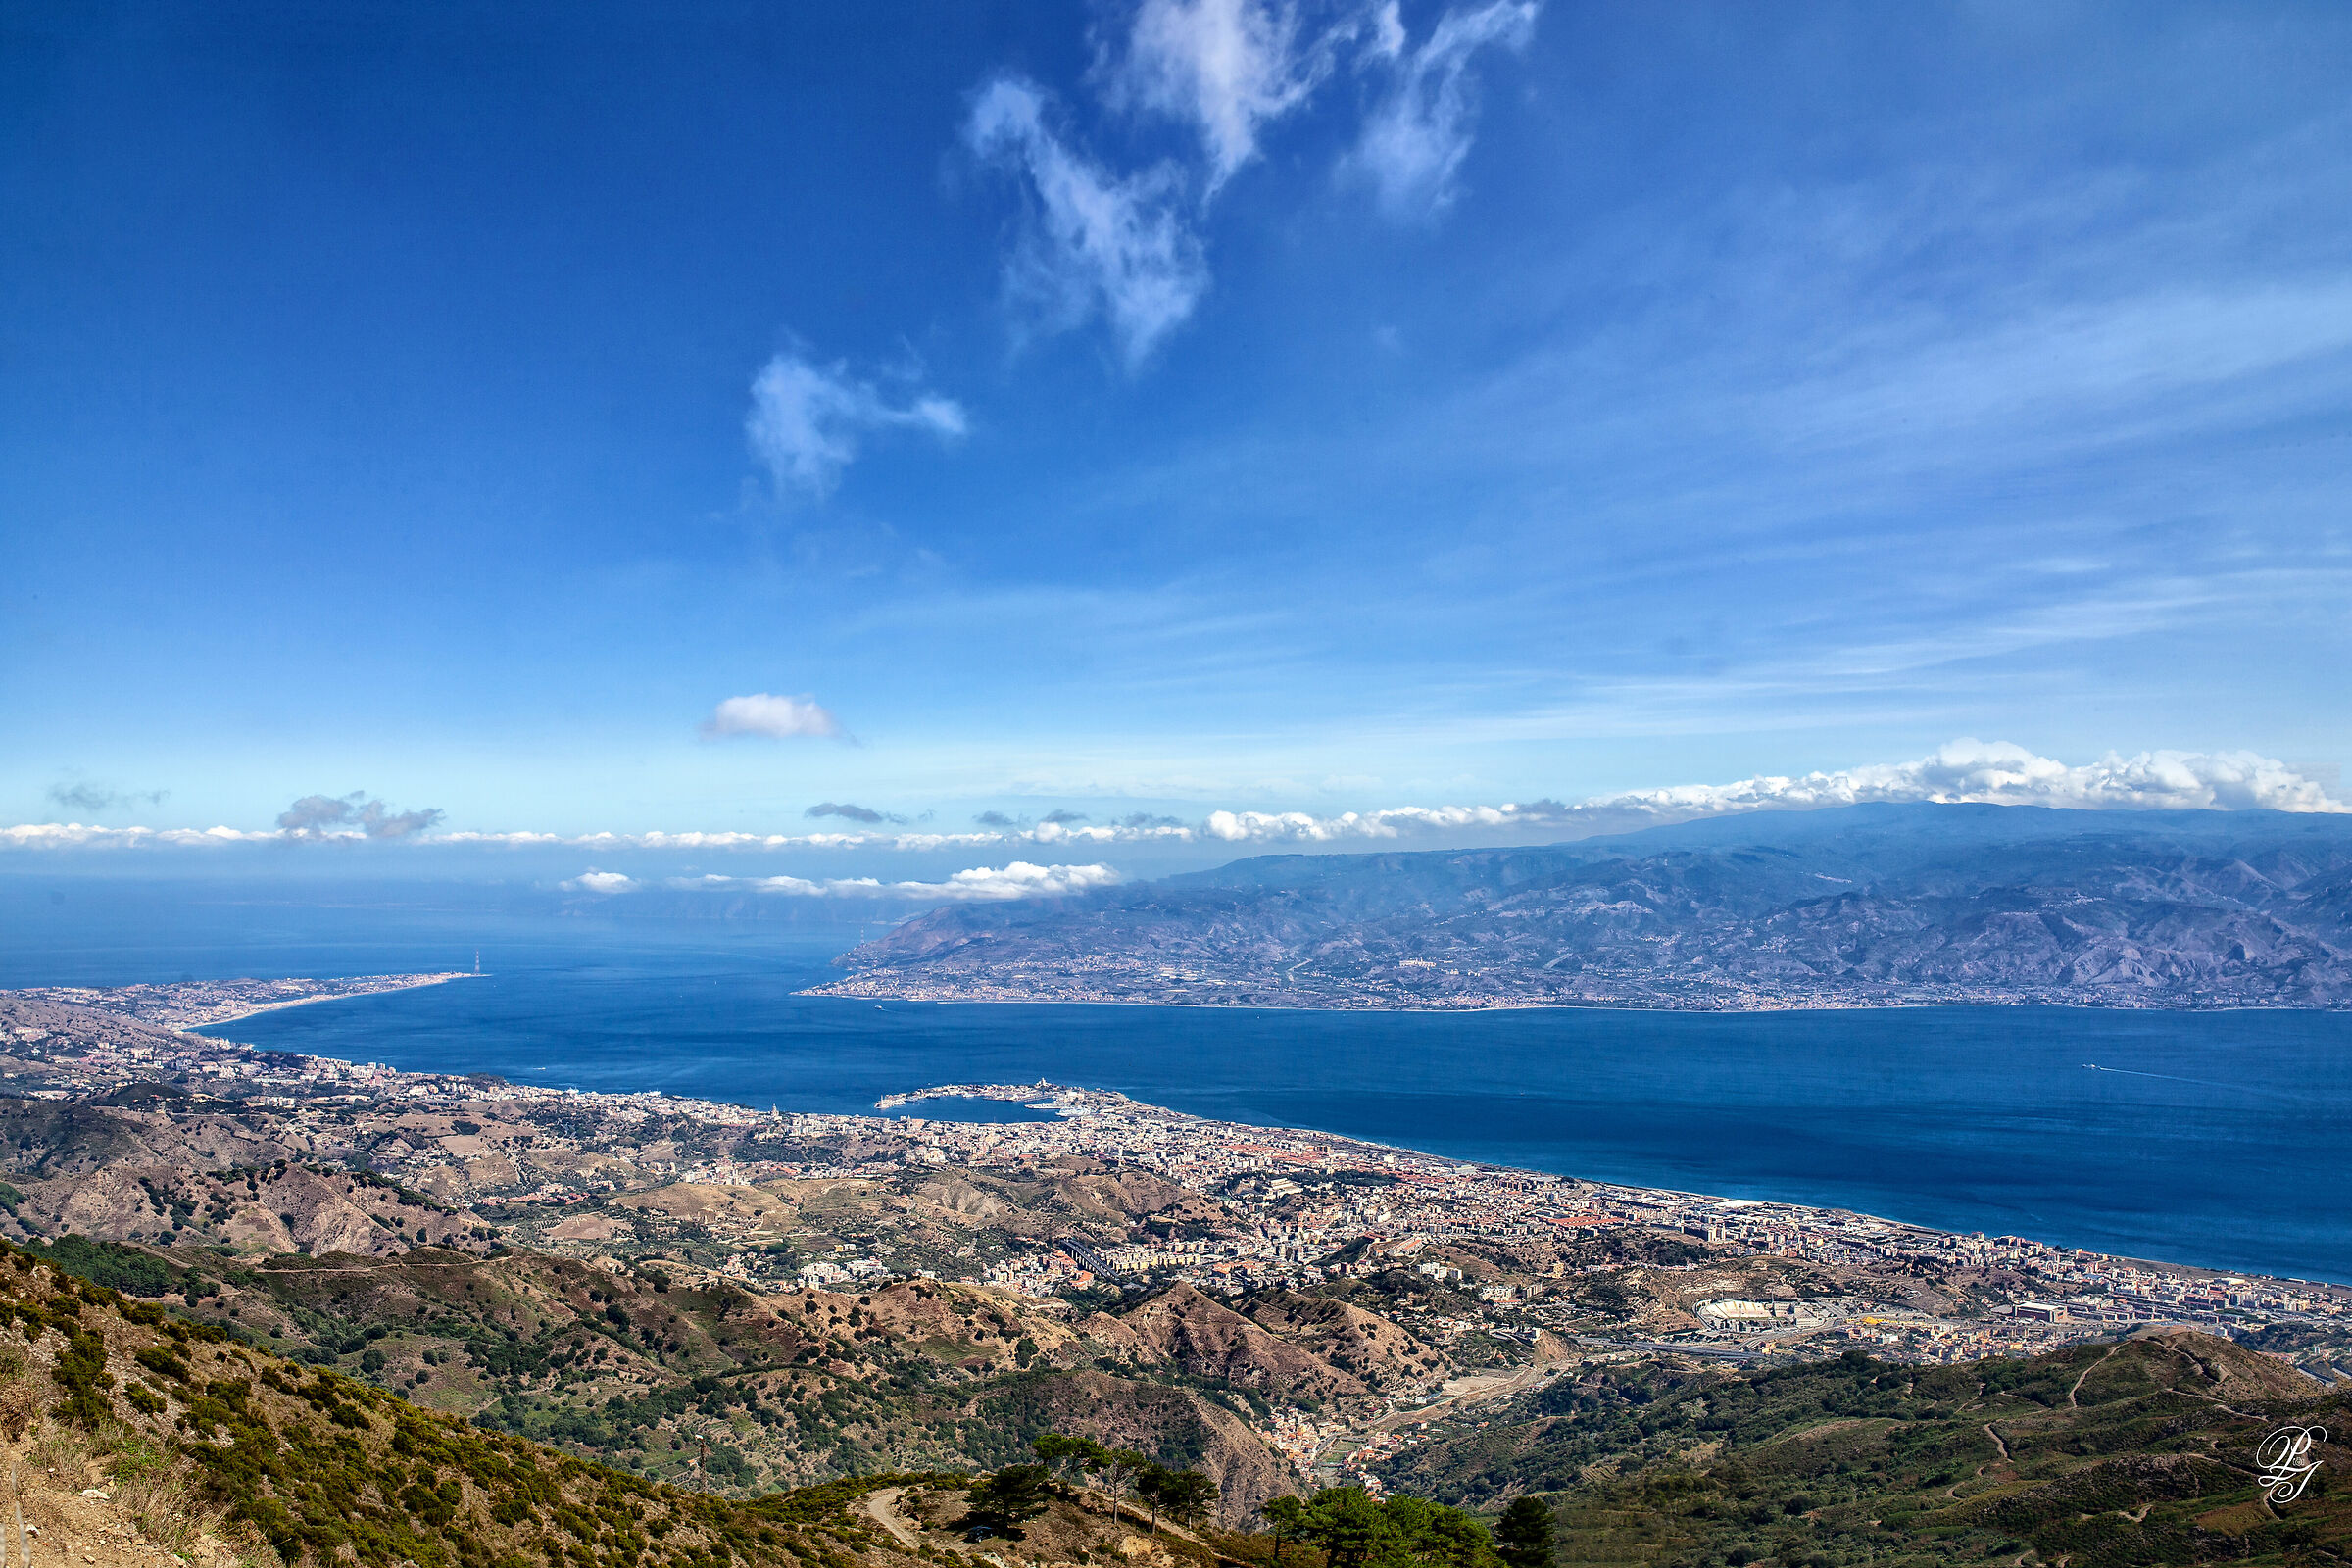 From Dinnammare the panorama of the Strait of Messina ...